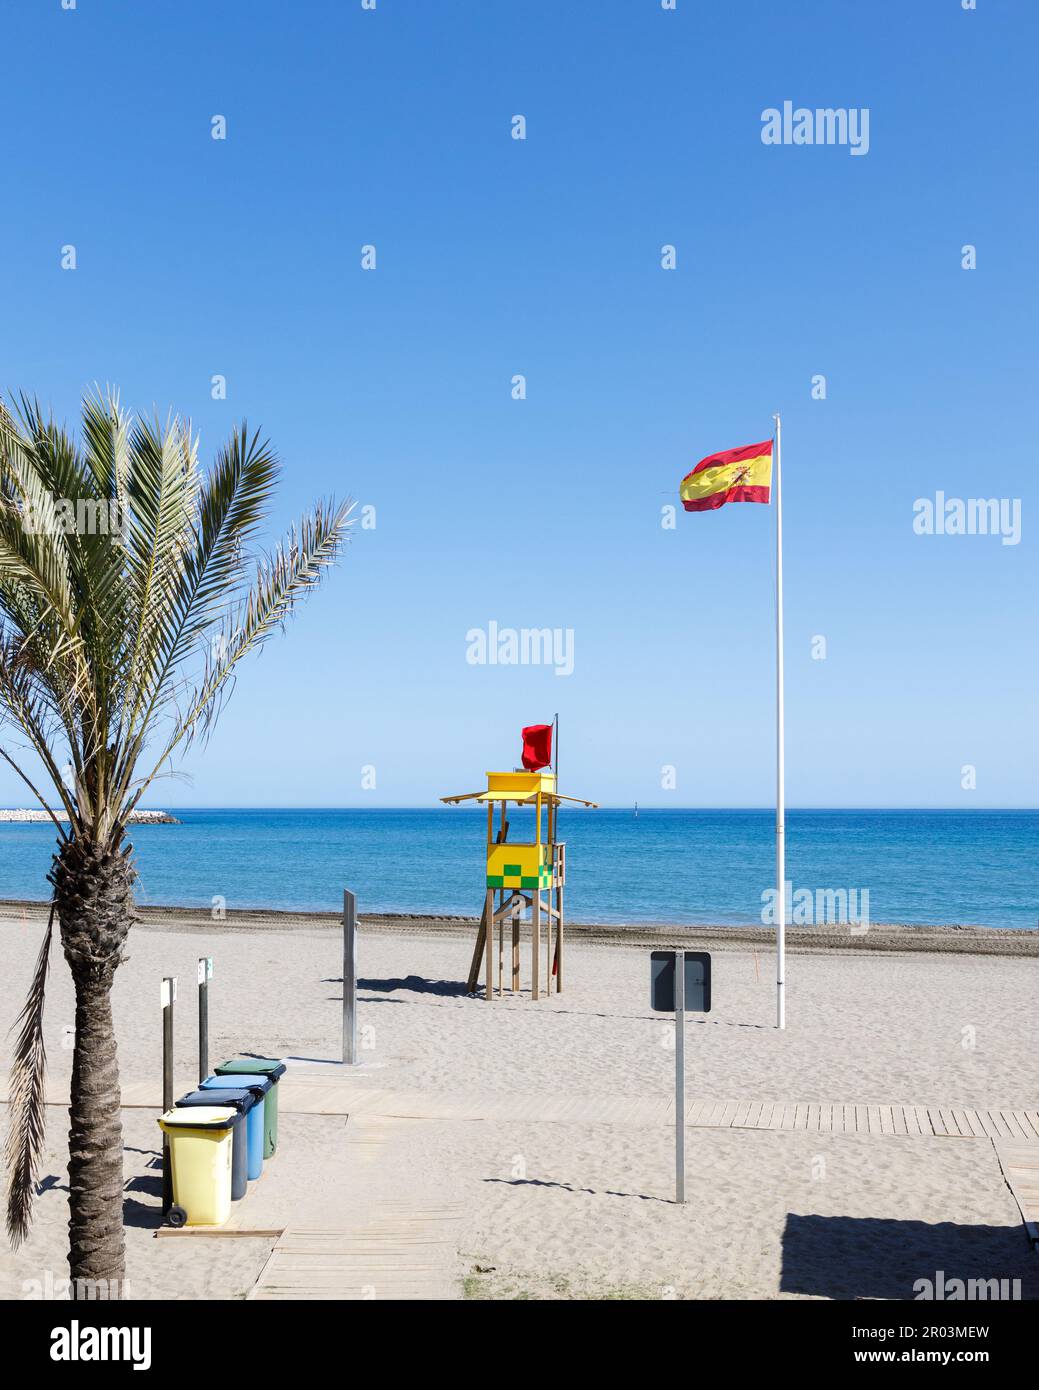 Beach with a palm tree in the foreground. Clear blue sky, deep sea, ocean, waving flag of Spain, sand, colored trash bins, rescue booth, summer Stock Photo